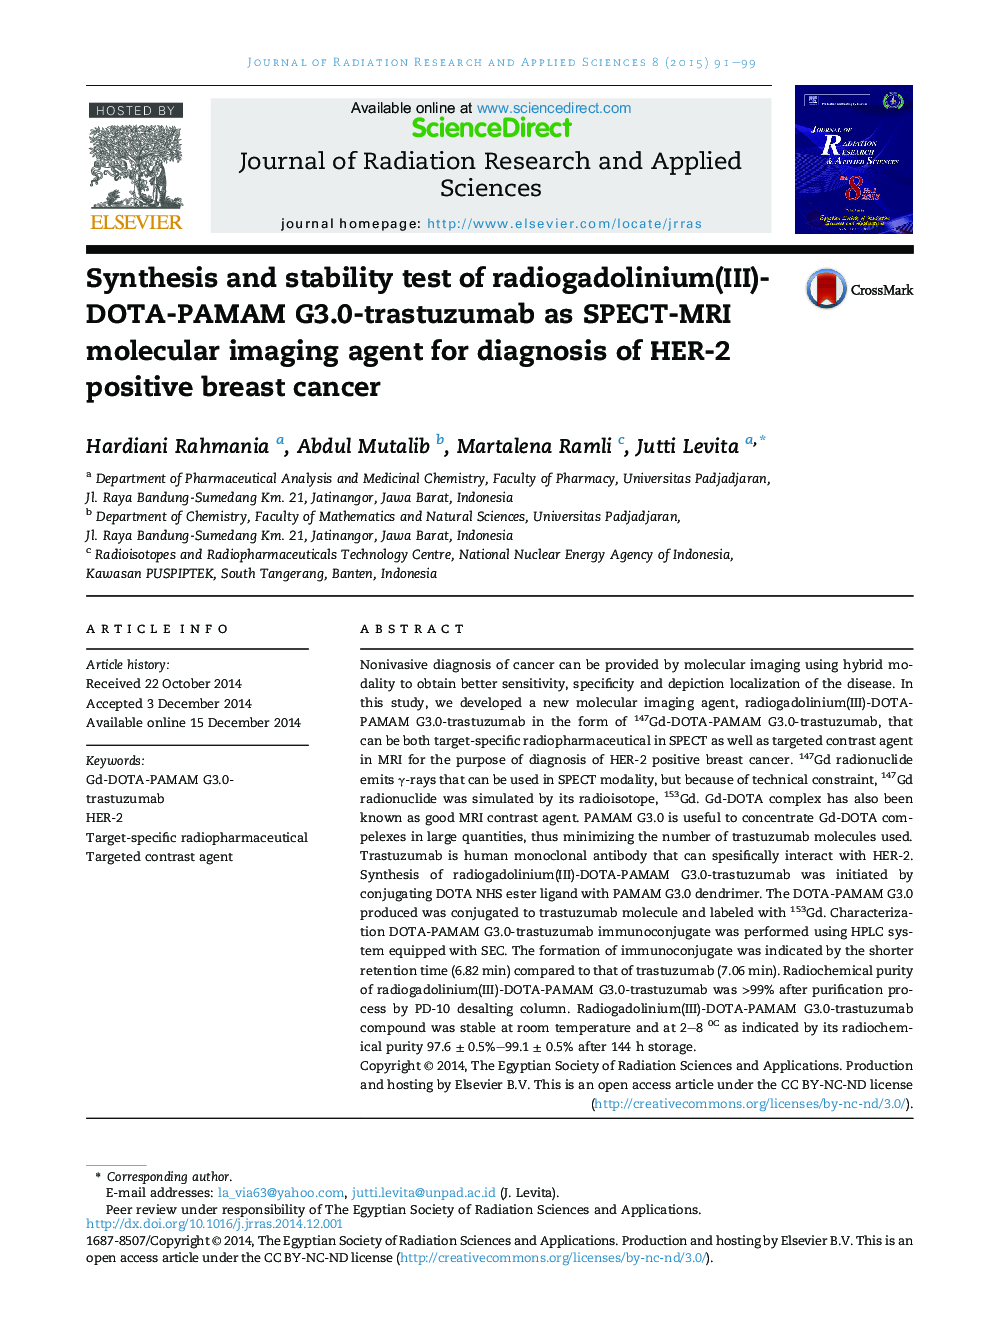 Synthesis and stability test of radiogadolinium(III)-DOTA-PAMAM G3.0-trastuzumab as SPECT-MRI molecular imaging agent for diagnosis of HER-2 positive breast cancer 